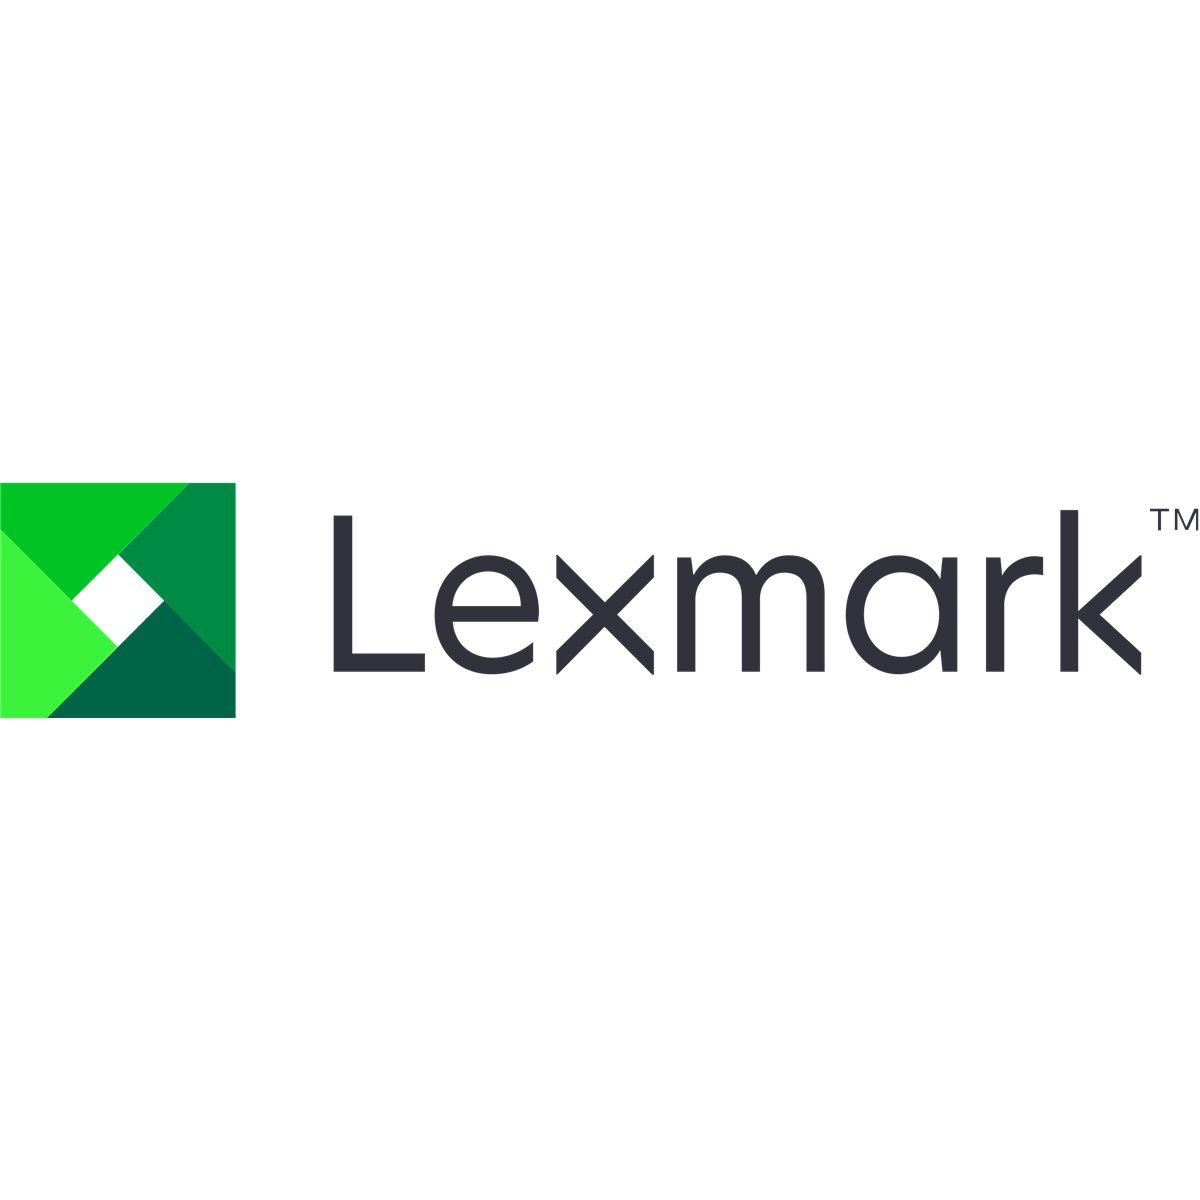 Lexmark 7" Touch screen display